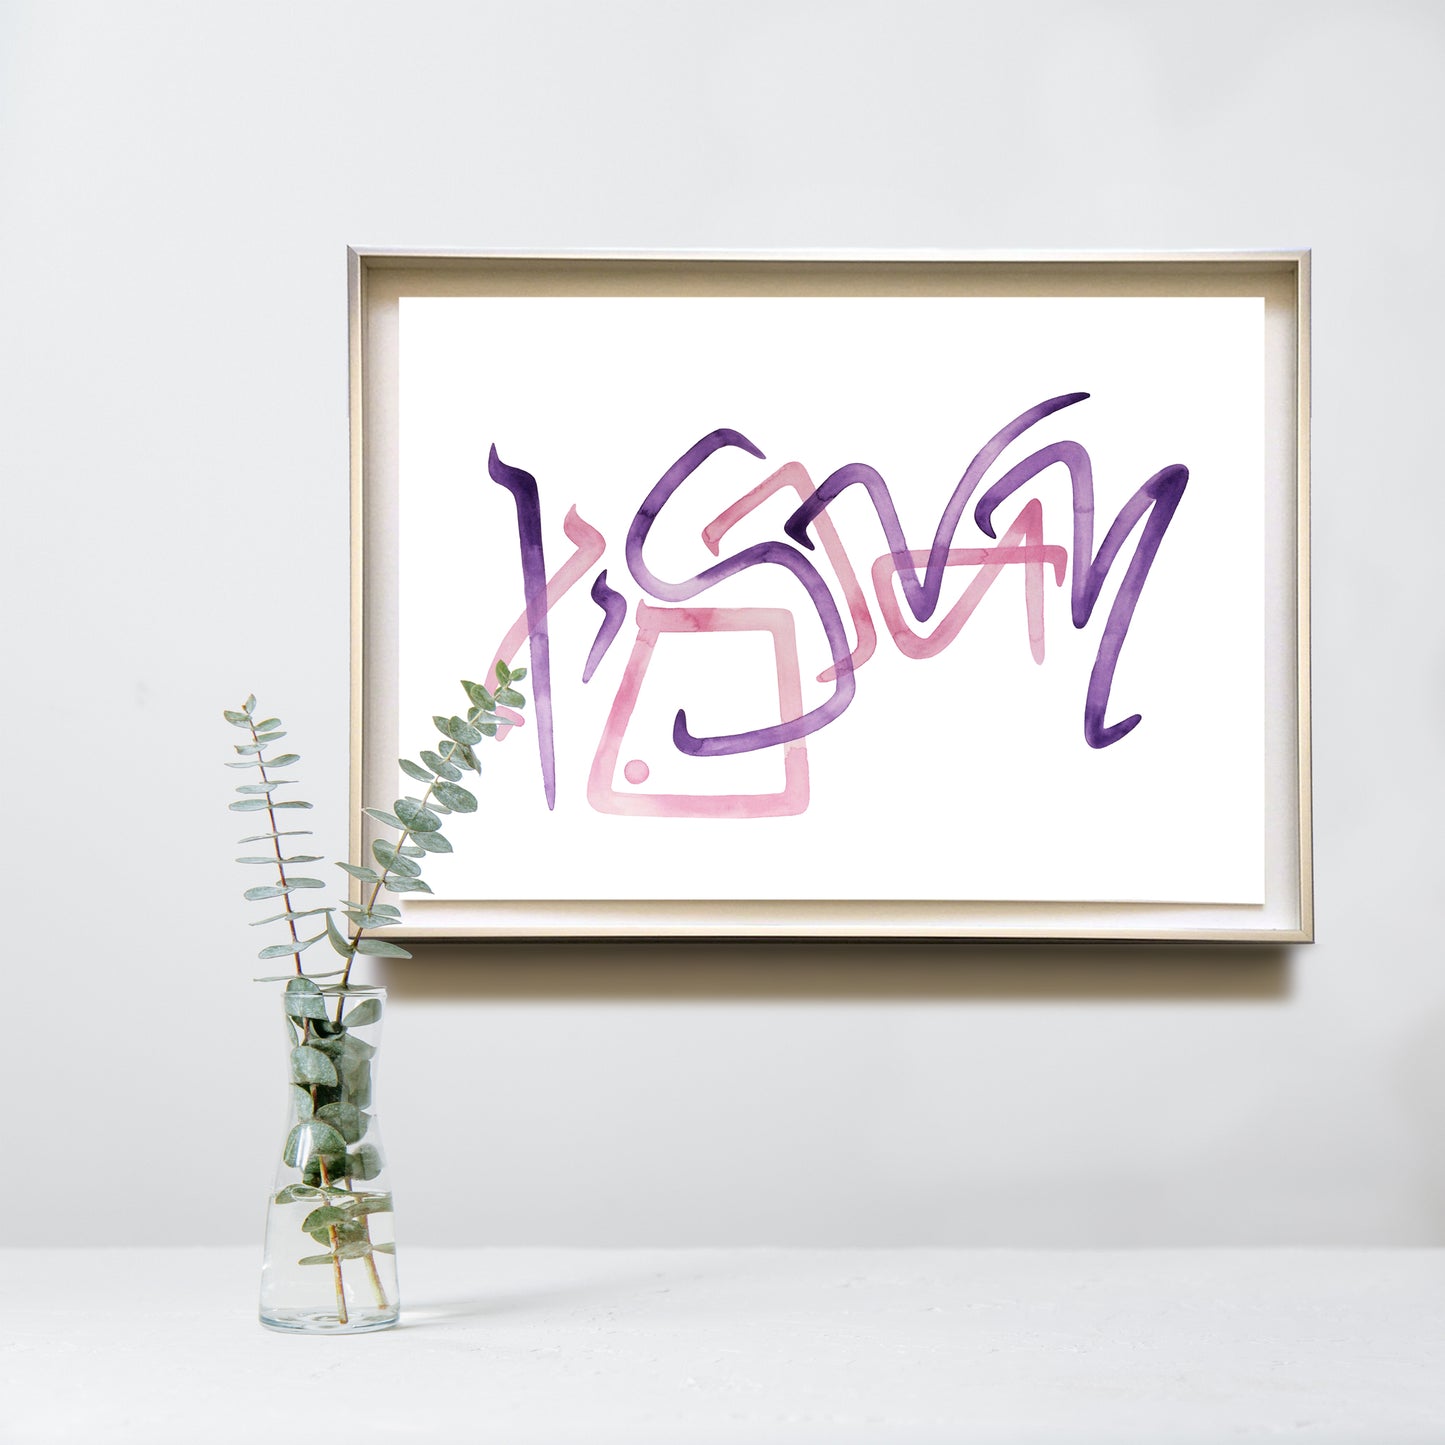 Name Blessing watercolor original painting, Calligraphy sign, Engagement bridal Gift, Wall art decor